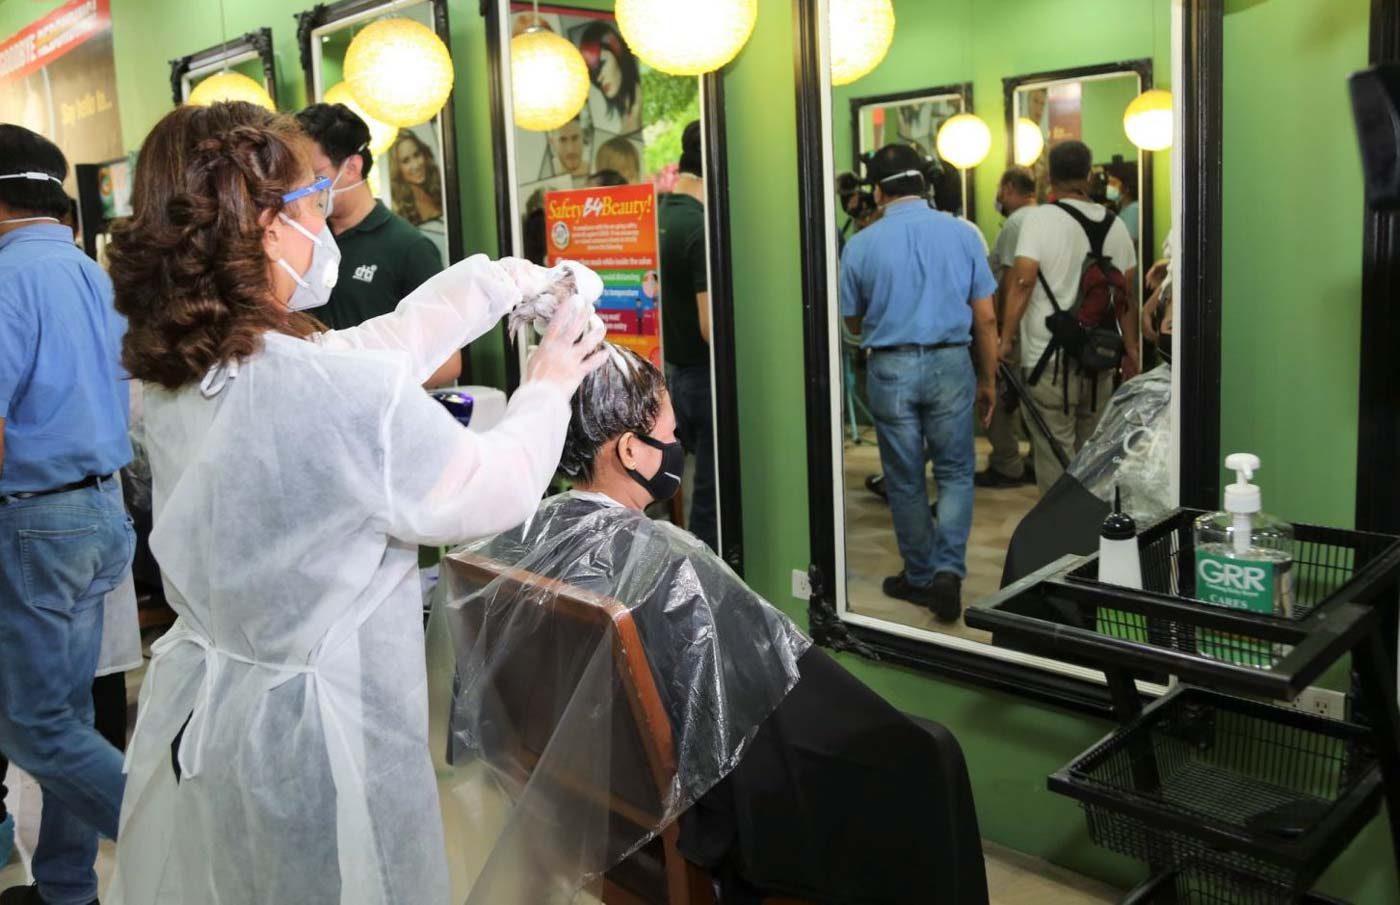 Salons may reopen soon, but health measures must be in place